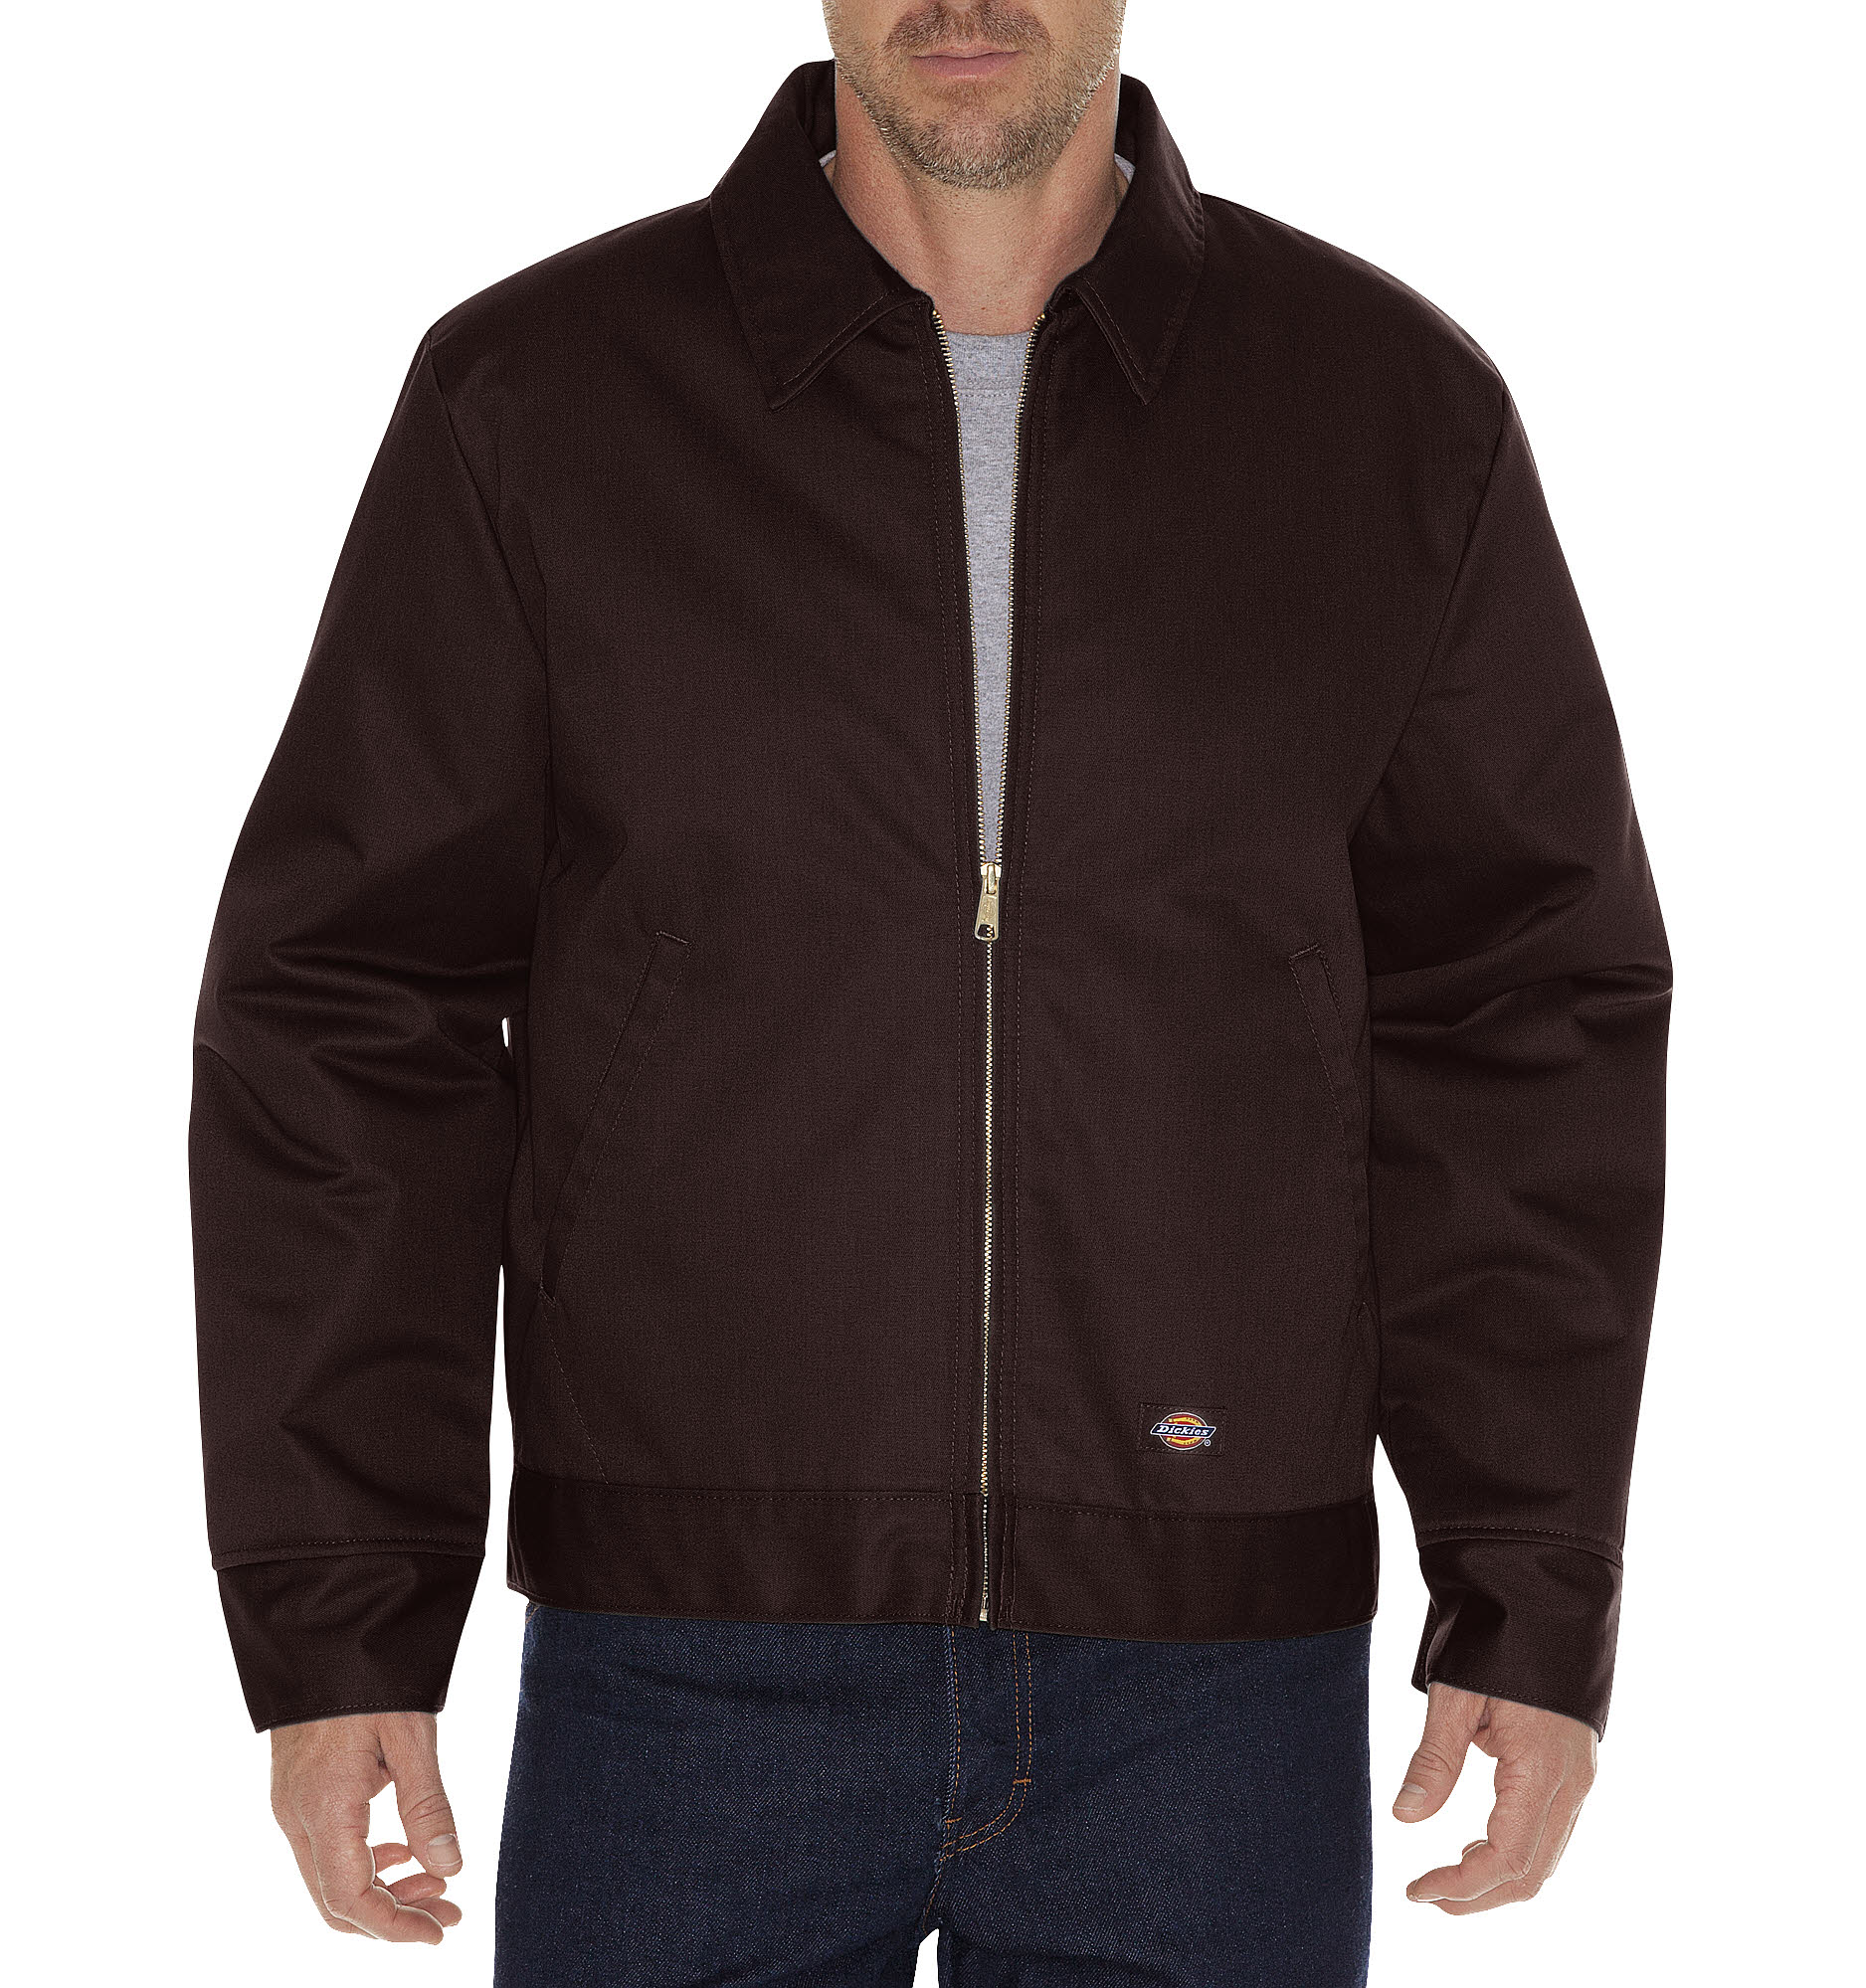 Lined Service Jacket - Corporate Cleaners & Laundry